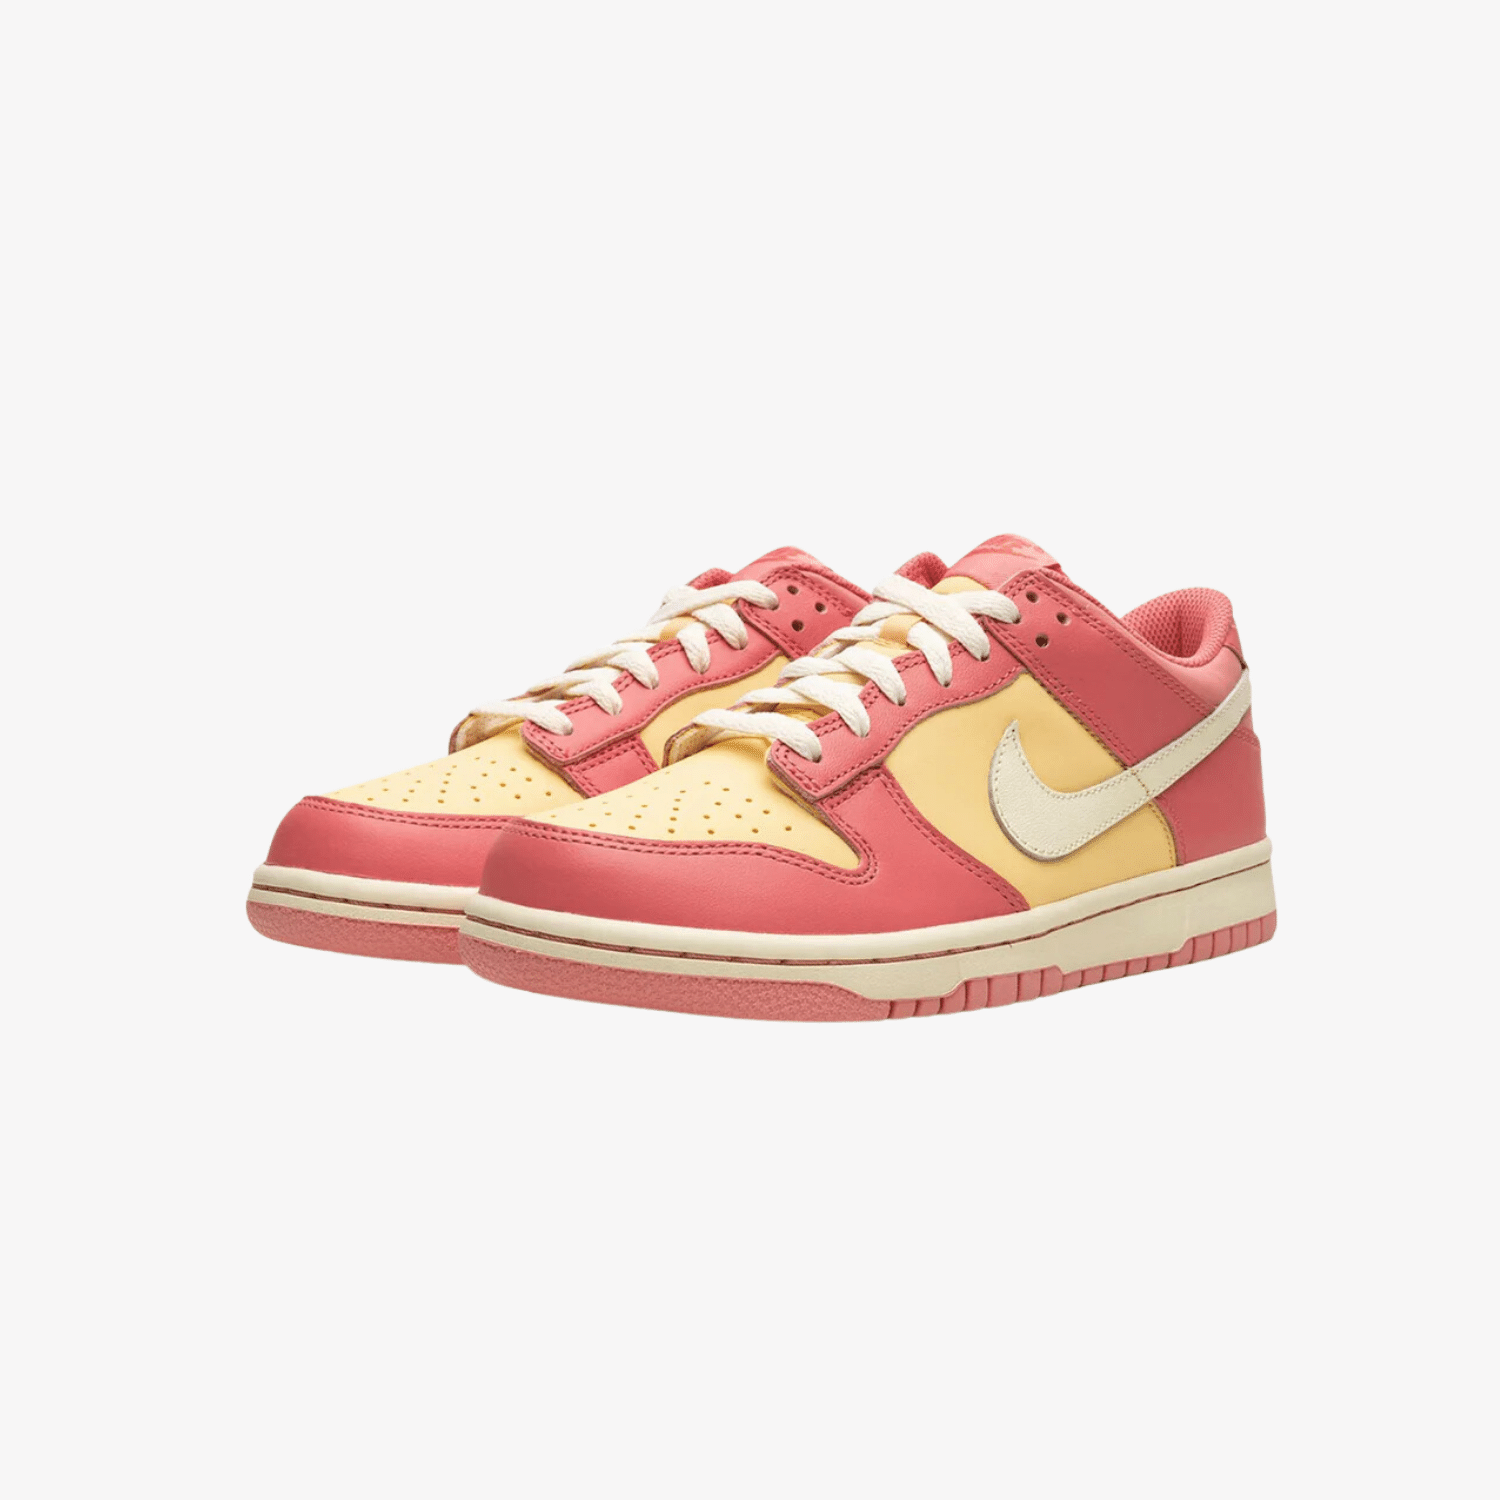    nike-dunk-low-strawberry-cream-DH9765-200-unfazed-2